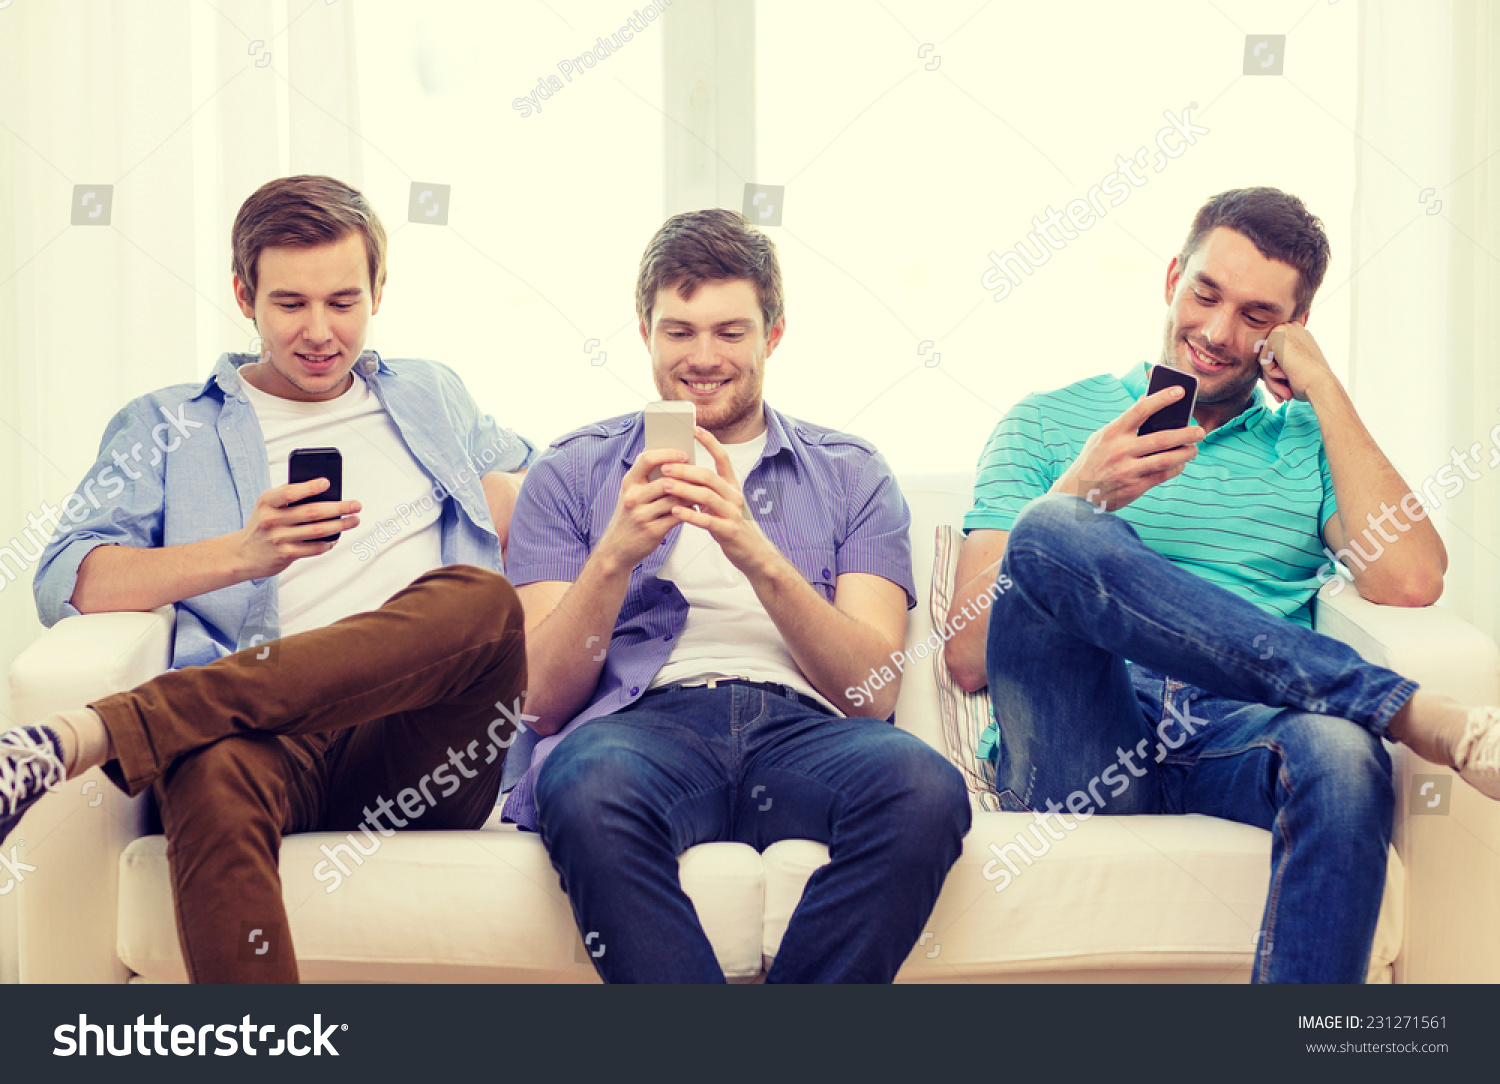 friendship, technology and home concept - smiling male friends with smartphones at home #231271561